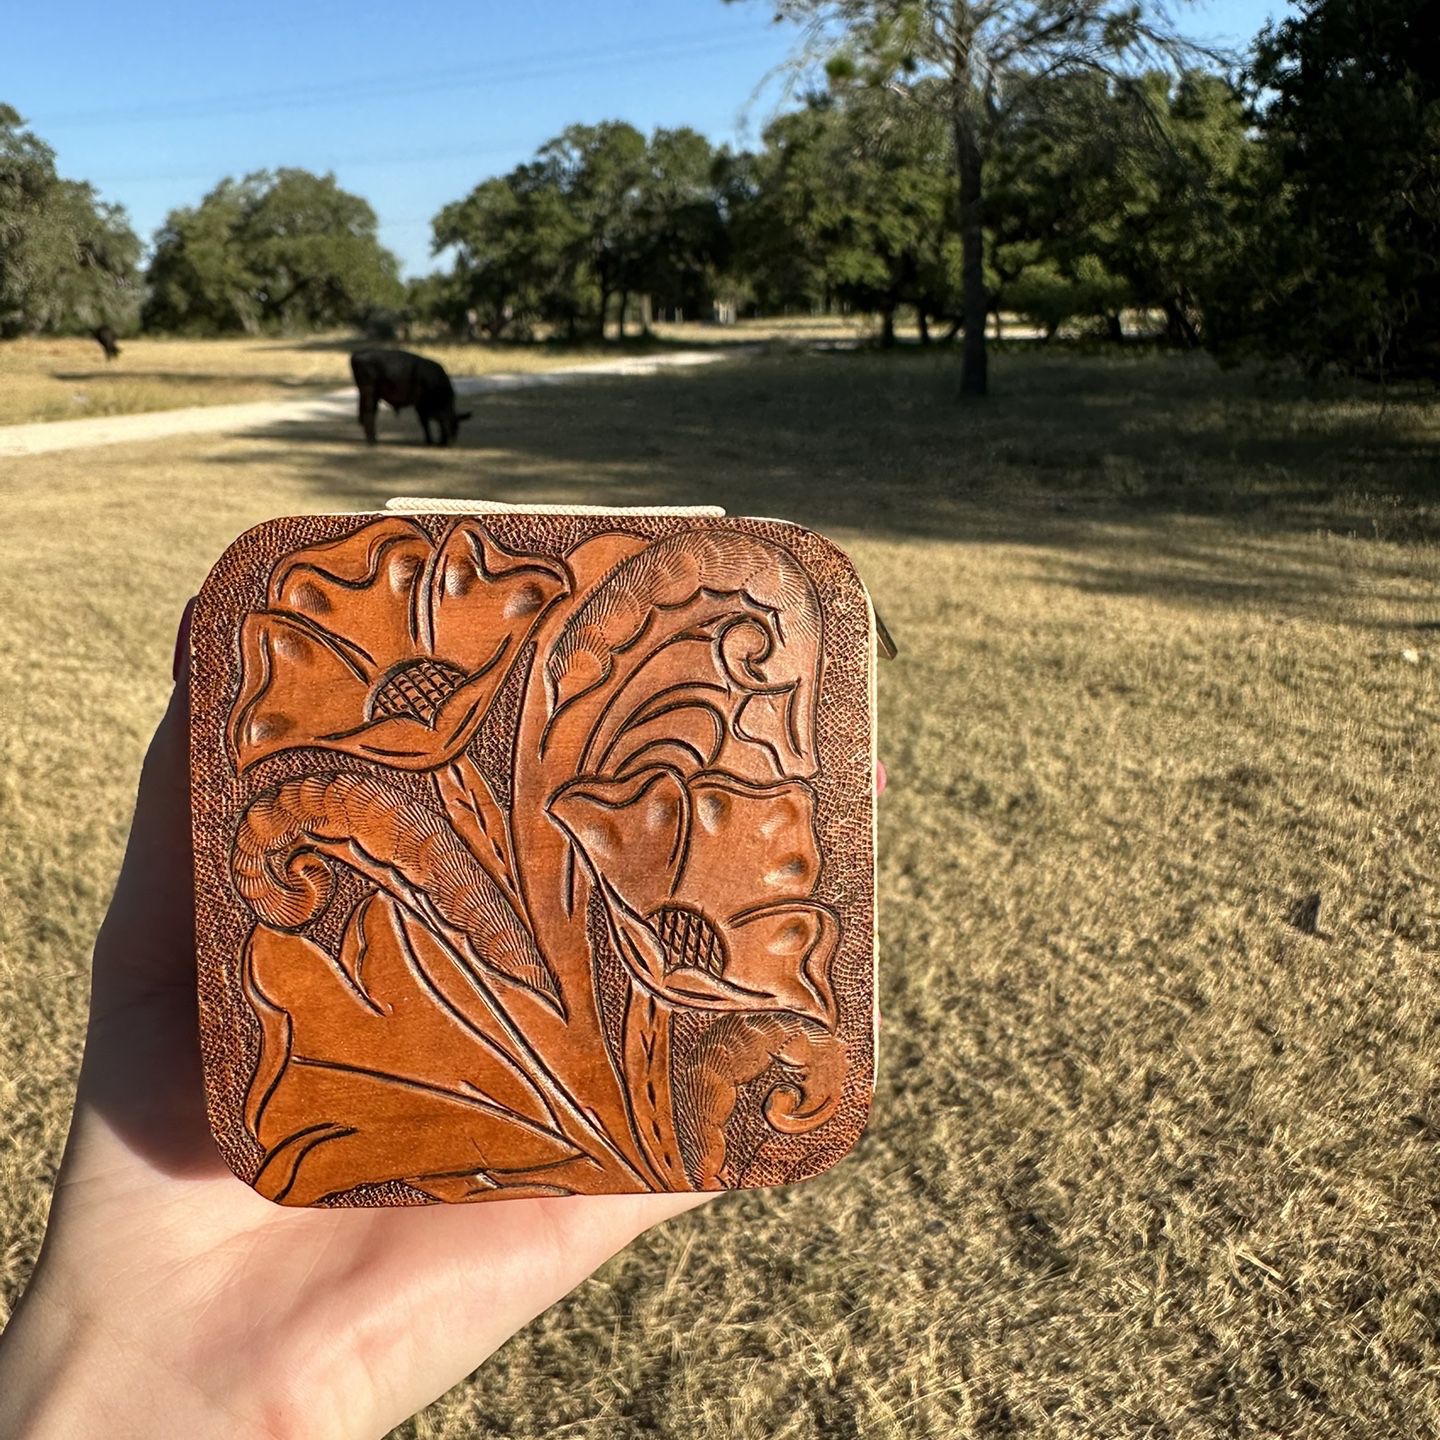 Tooled Leather Travel Jewelry Box for Sale in Boerne, TX - OfferUp